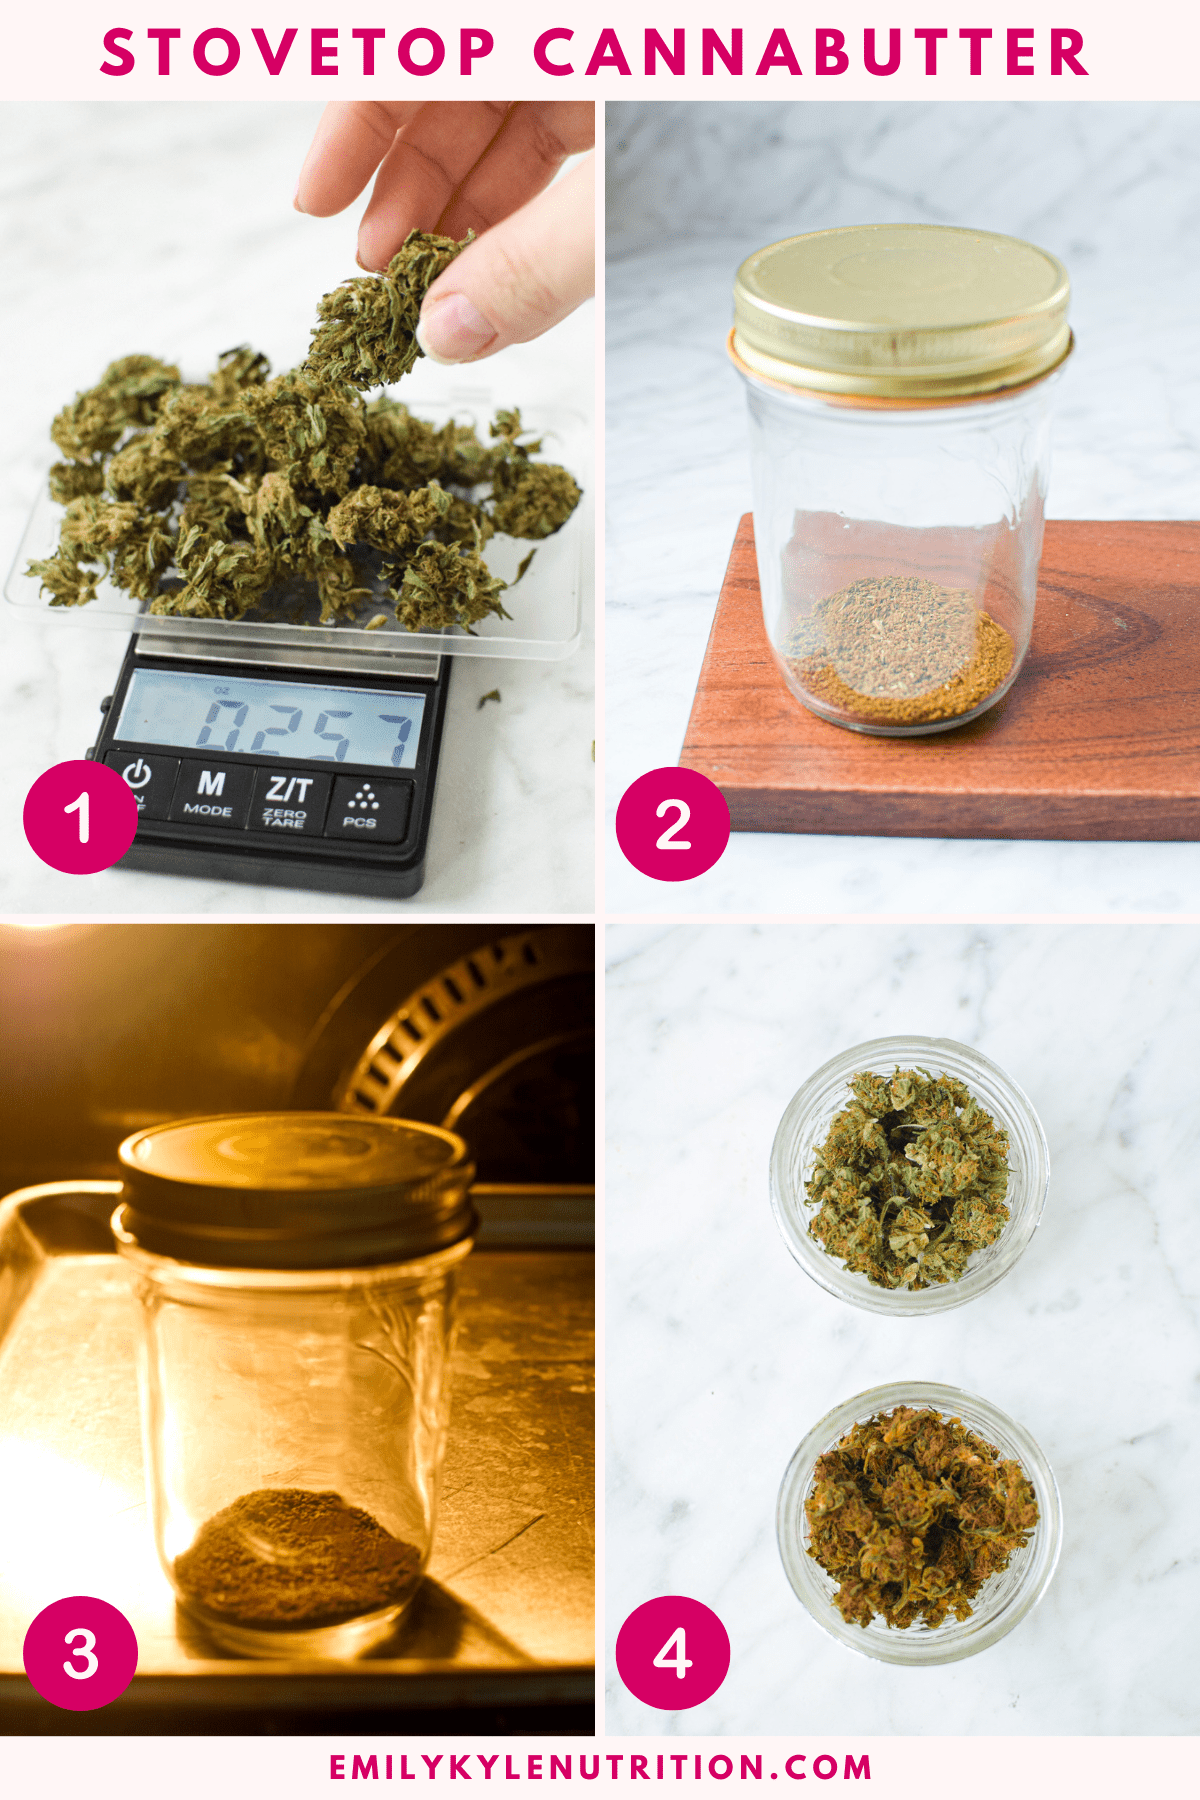 A four step image collage showing the steps needed to make stovetop cannabutter.